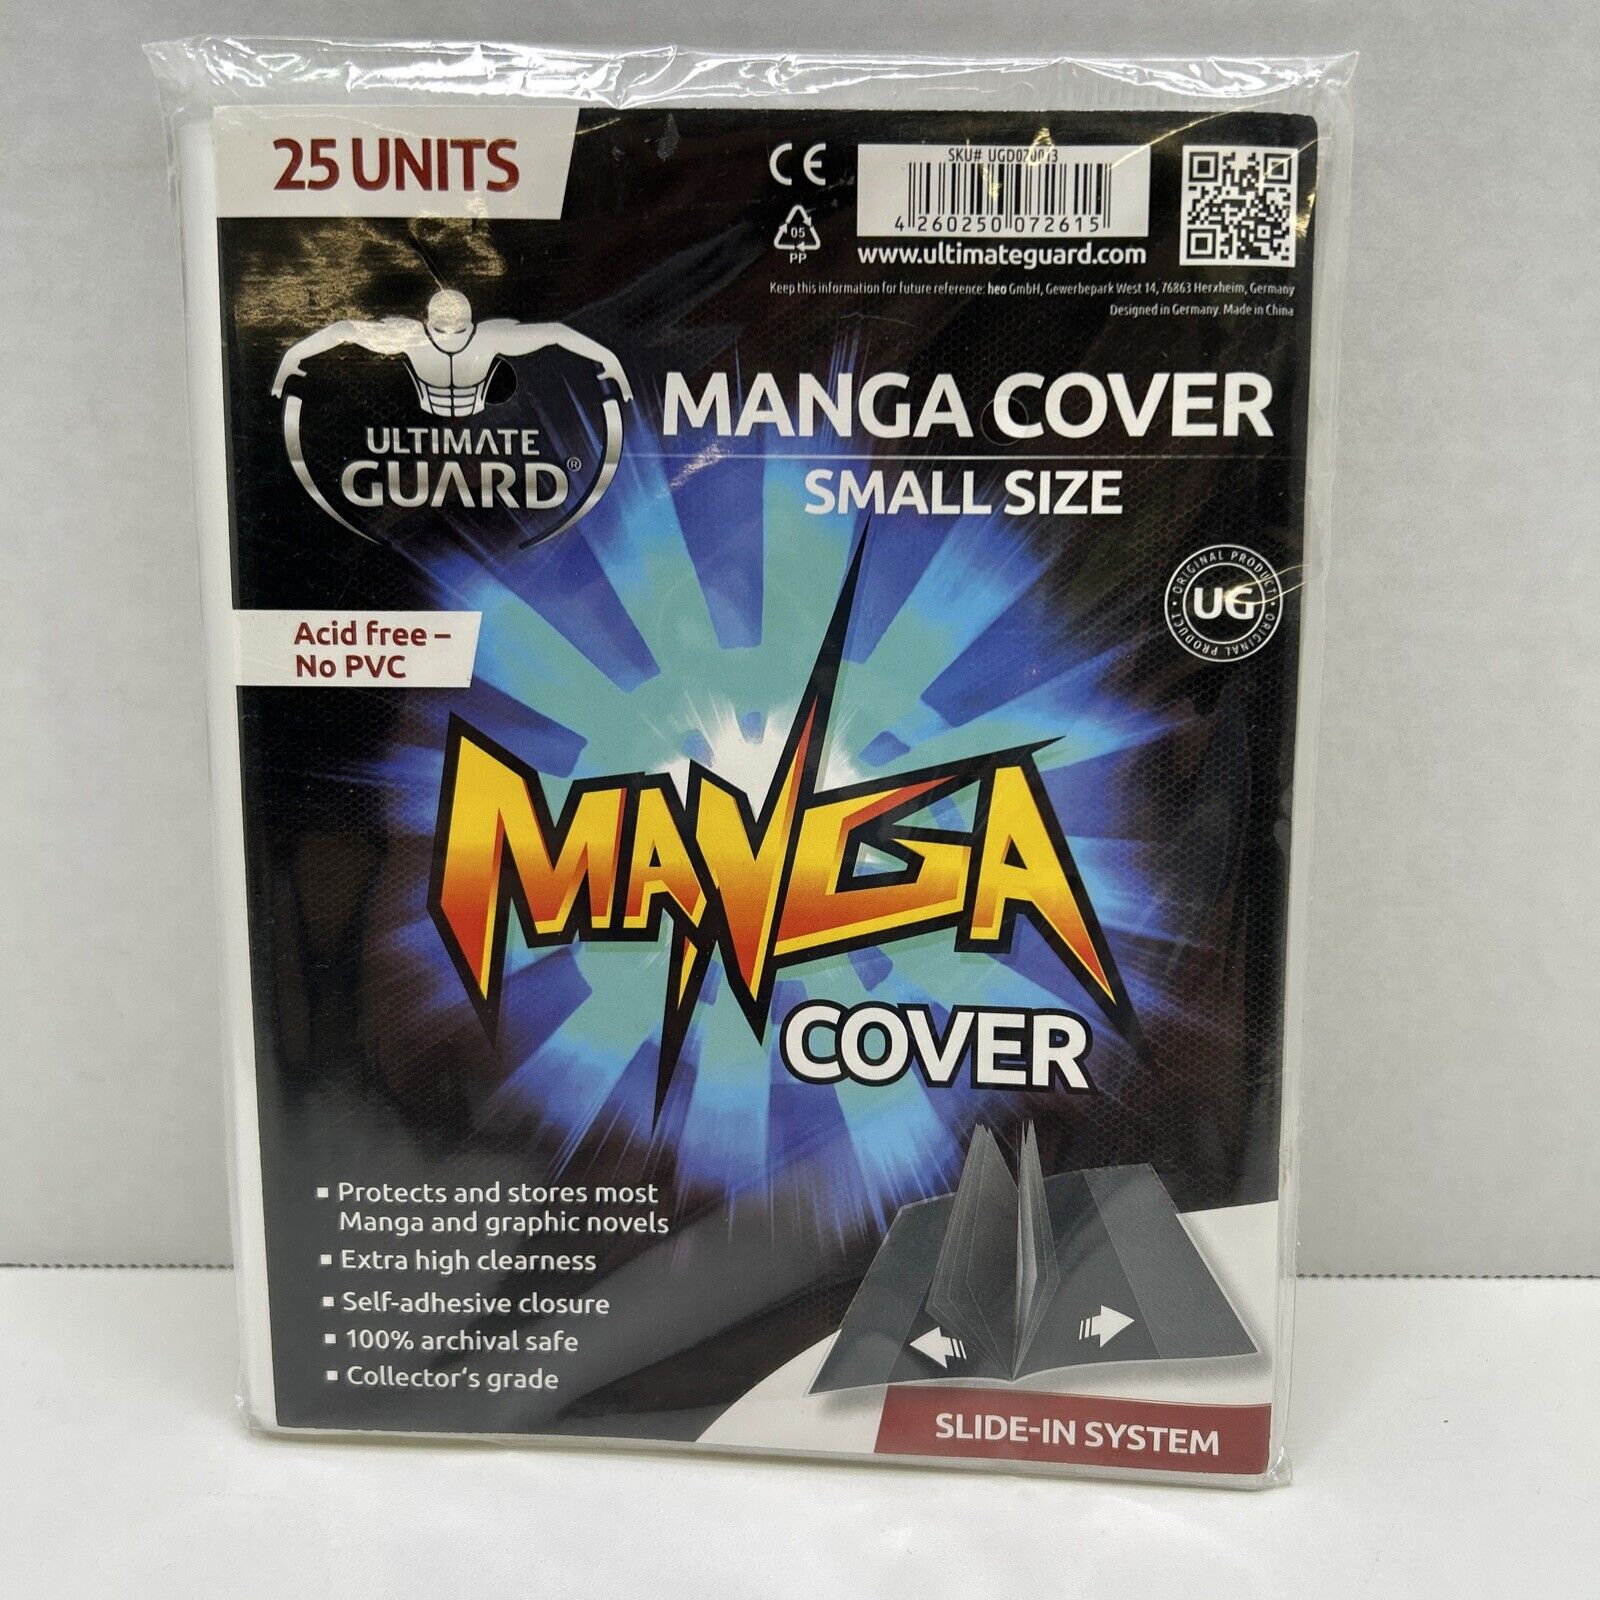 Manga Covers, Small - Ultimate Guard NEW Acid Free No PVC 100% Archival Safe